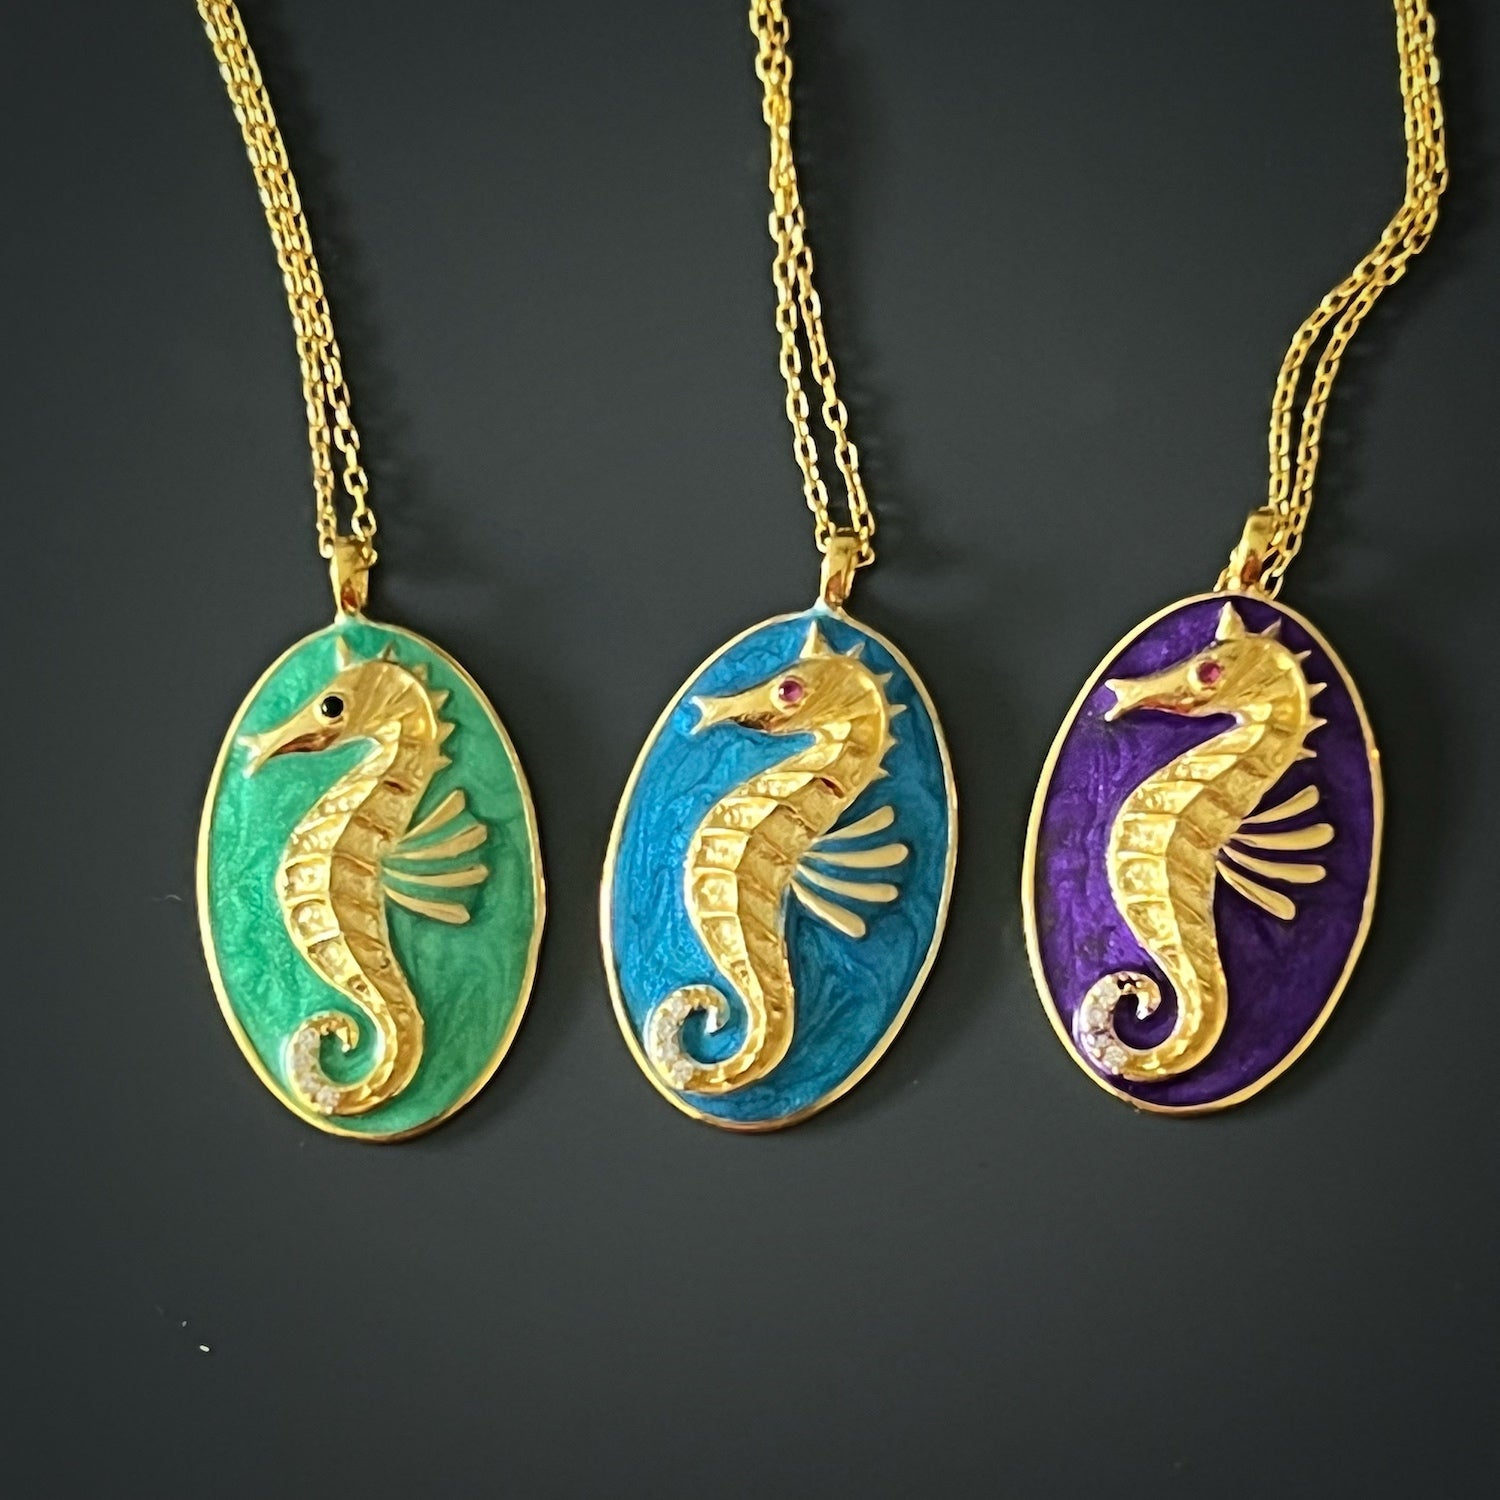 The elegant Spirit Animal Green Seahorse Necklace, crafted with 925 Sterling silver and 18K gold plating for a luxurious and meaningful accessory.